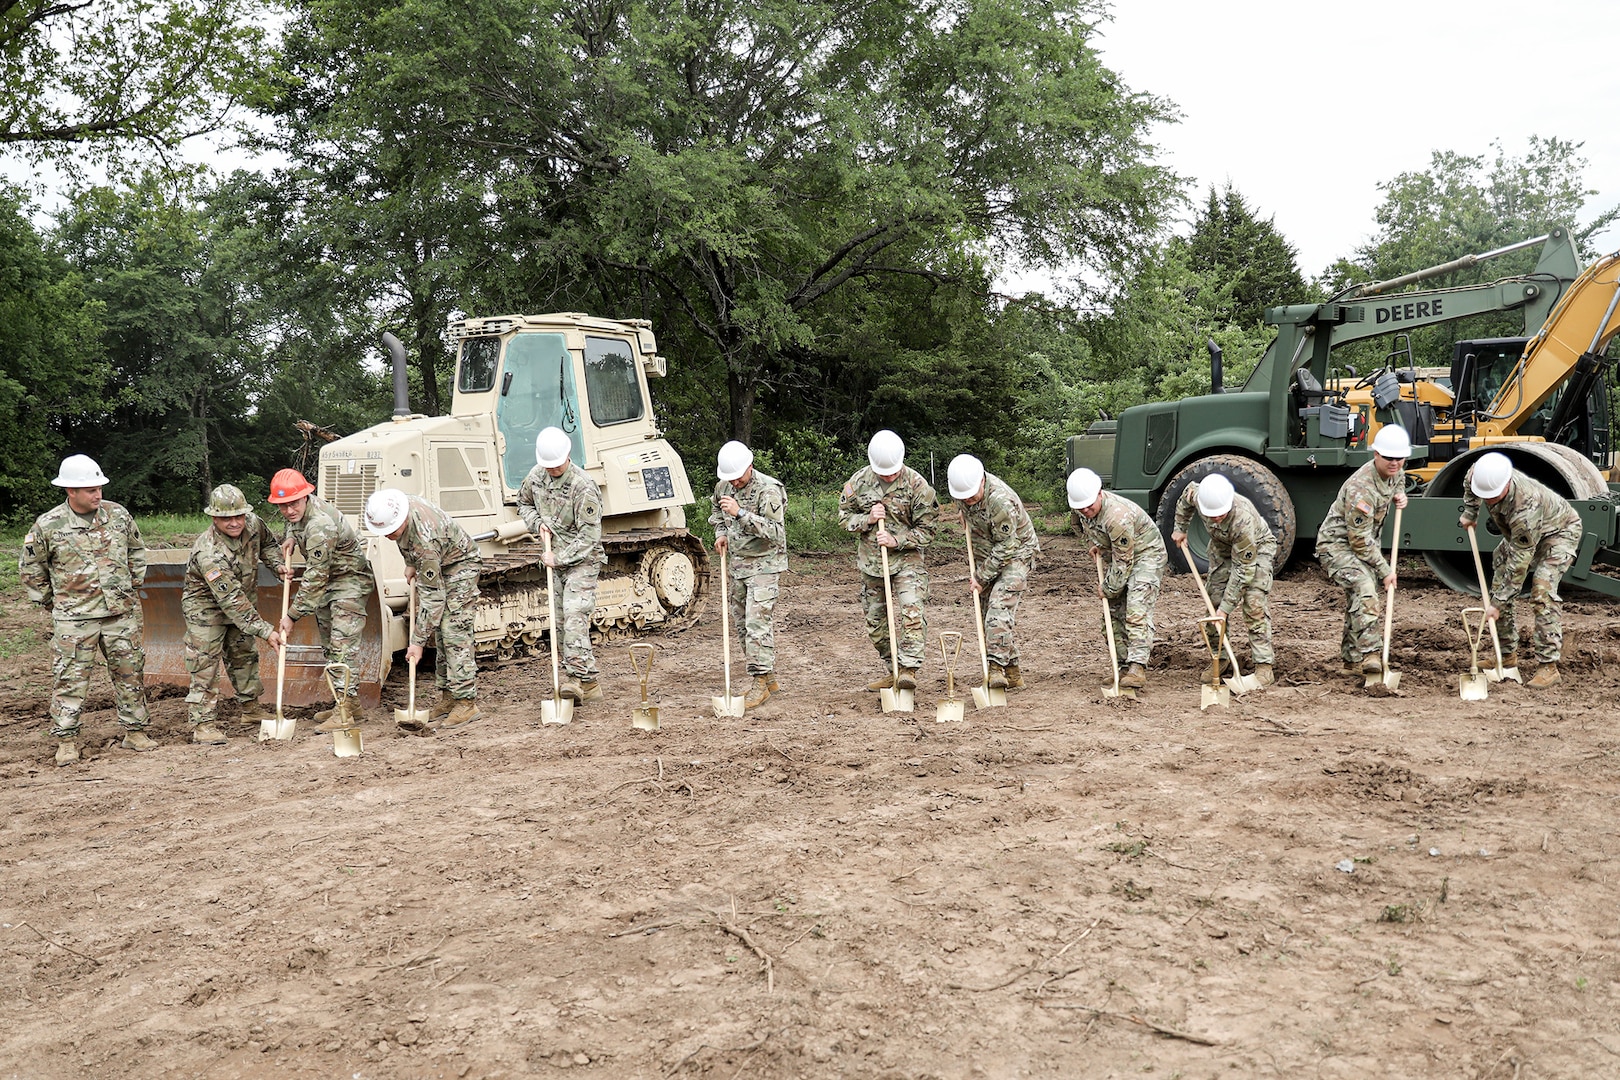 Leaders from the Oklahoma National Guard break ground on the Oklahoma National Guard’s new one-way attack trench warfare lane at Camp Gruber Training Center, Oklahoma on June 2, 2024. After reviewing how the war in Ukraine has developed over the last two years, Oklahoma National Guard leadership elected to construct a trench warfare lane to ensure its Citizen-Soldiers are ready to face large-scale combat operations against near-peer enemies like Russia and China. (Oklahoma National Guard photo by Sgt. Conner McBride)